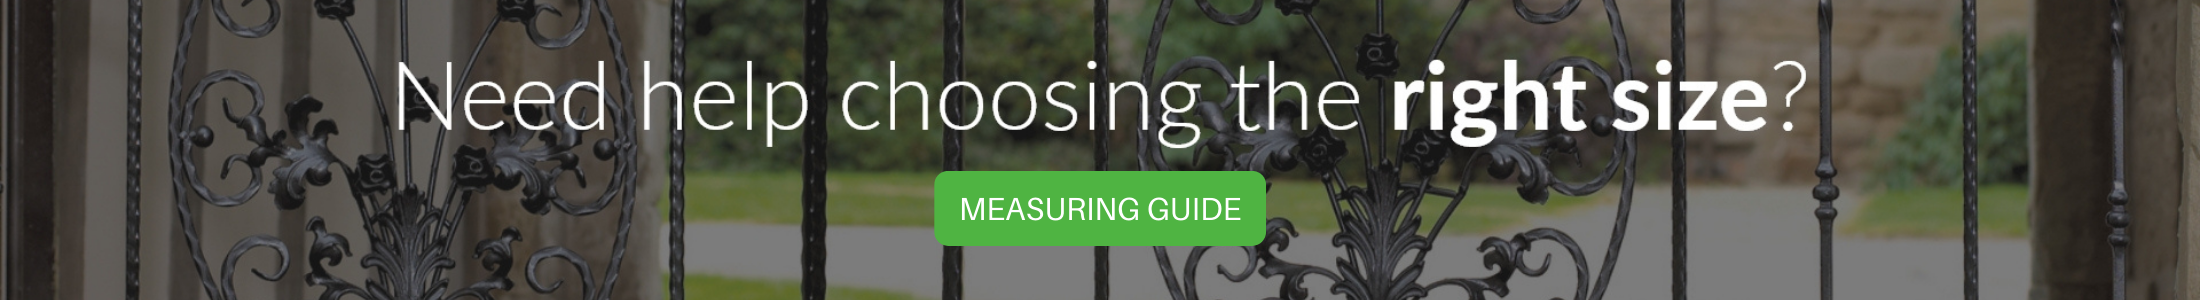 See the full measuring guide here